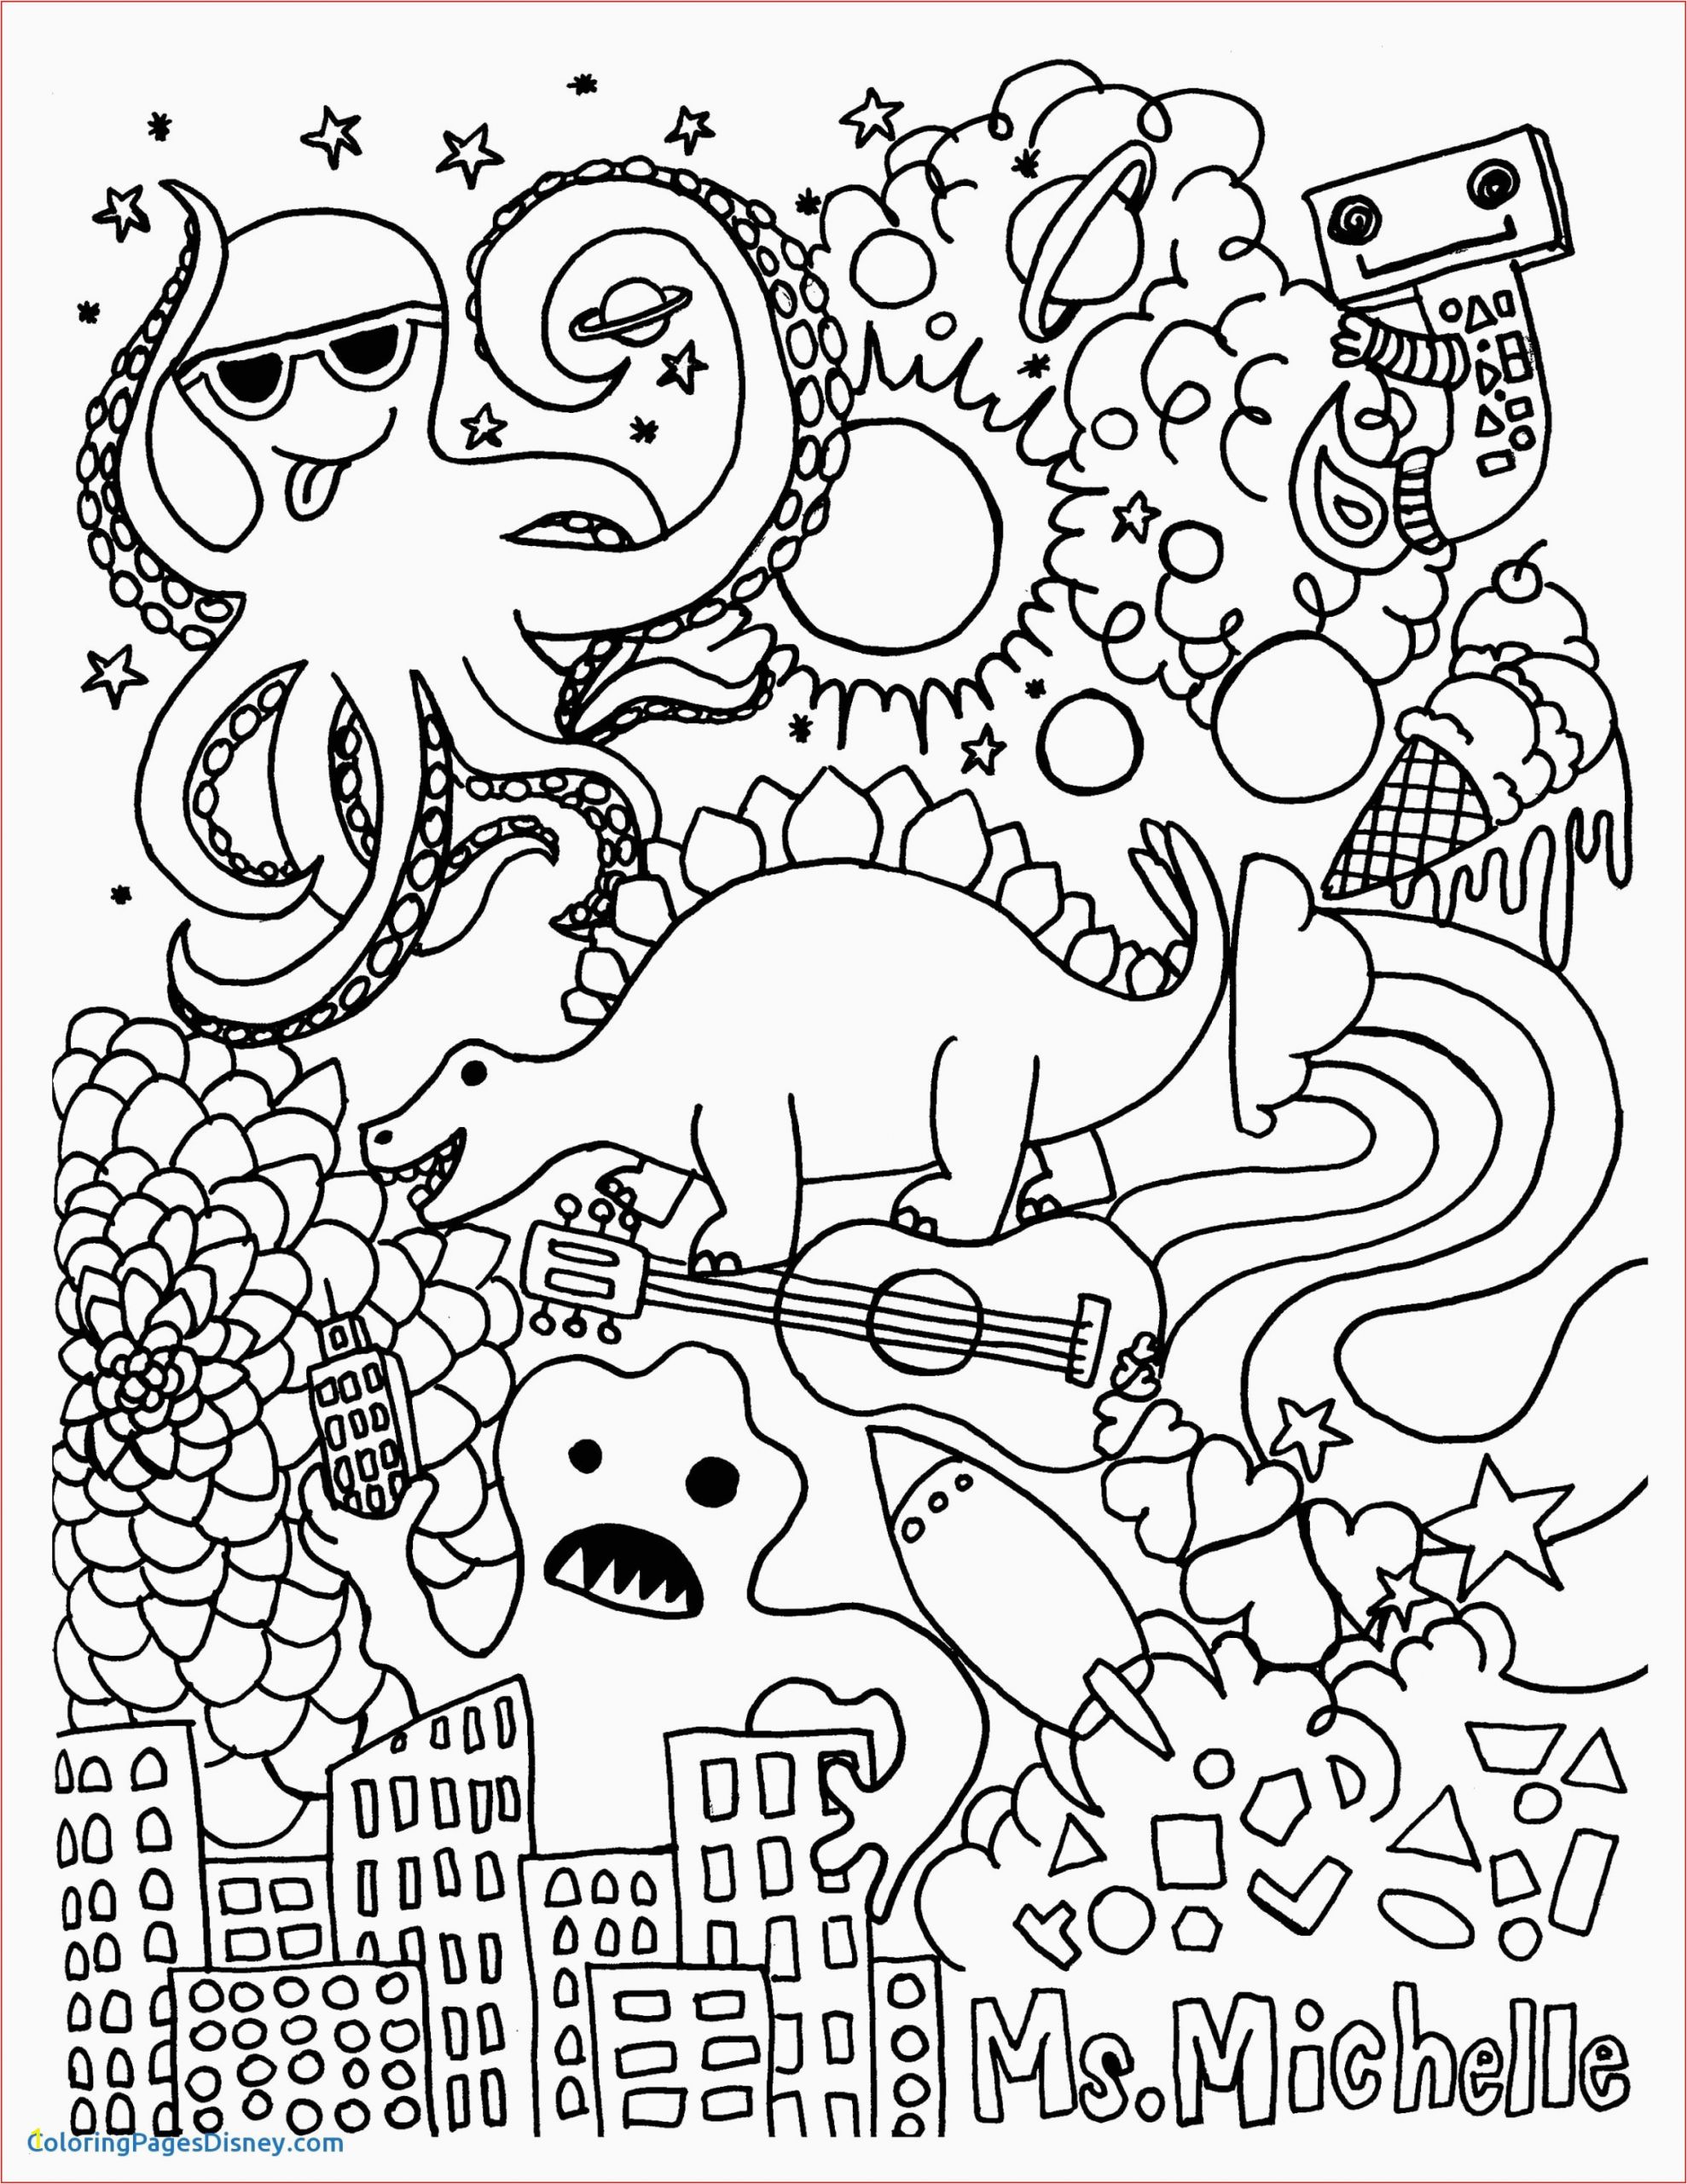 printable frozen coloring pages sharpie book intricate books adult paper lion bicycle preschool tropical wonderland colouring pantone chip cat adults disney